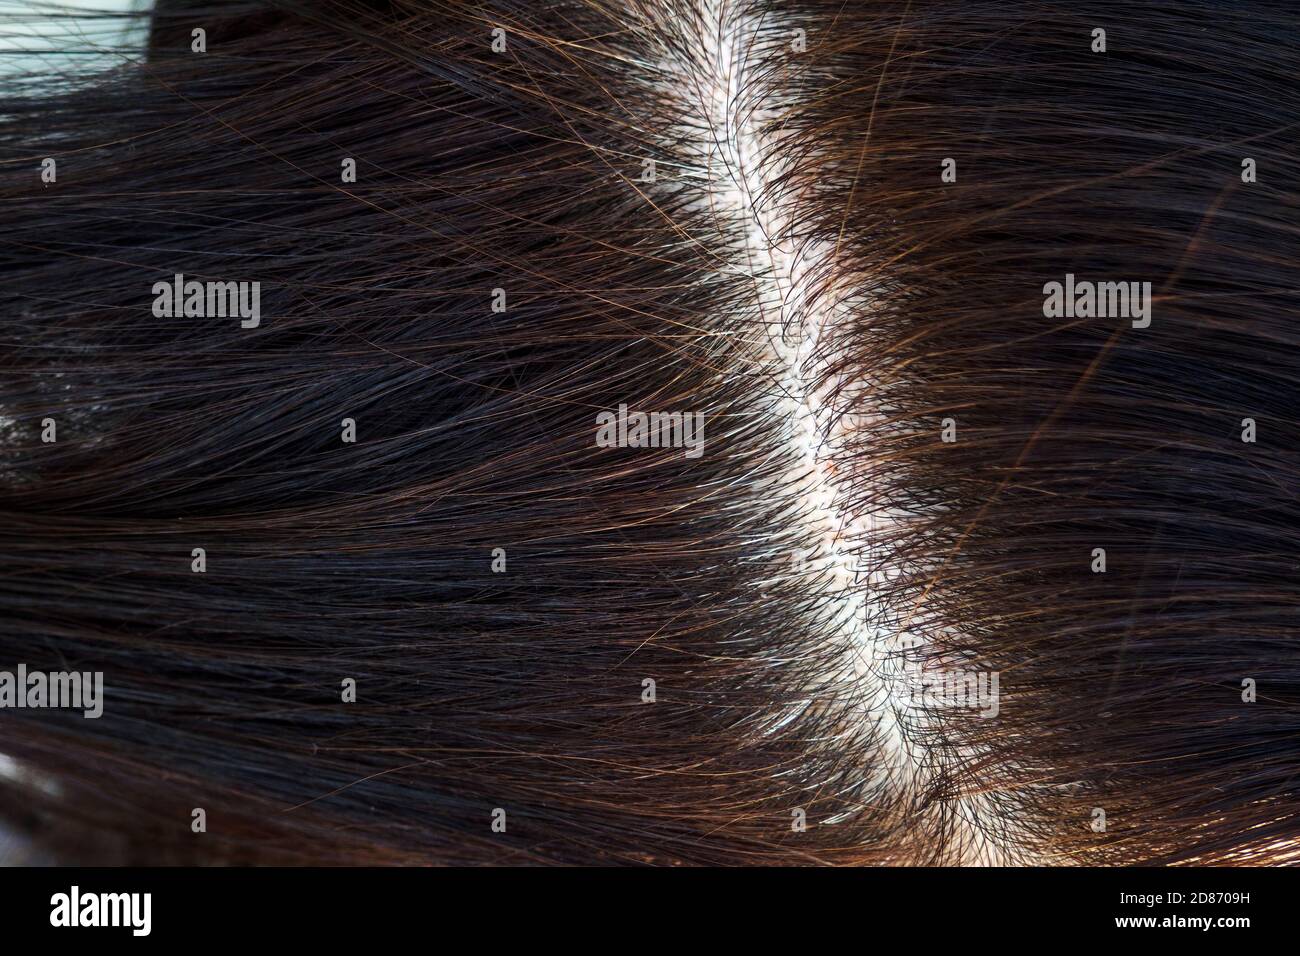 Womens head with gray hair, close-up view of regrown roots. Stock Photo